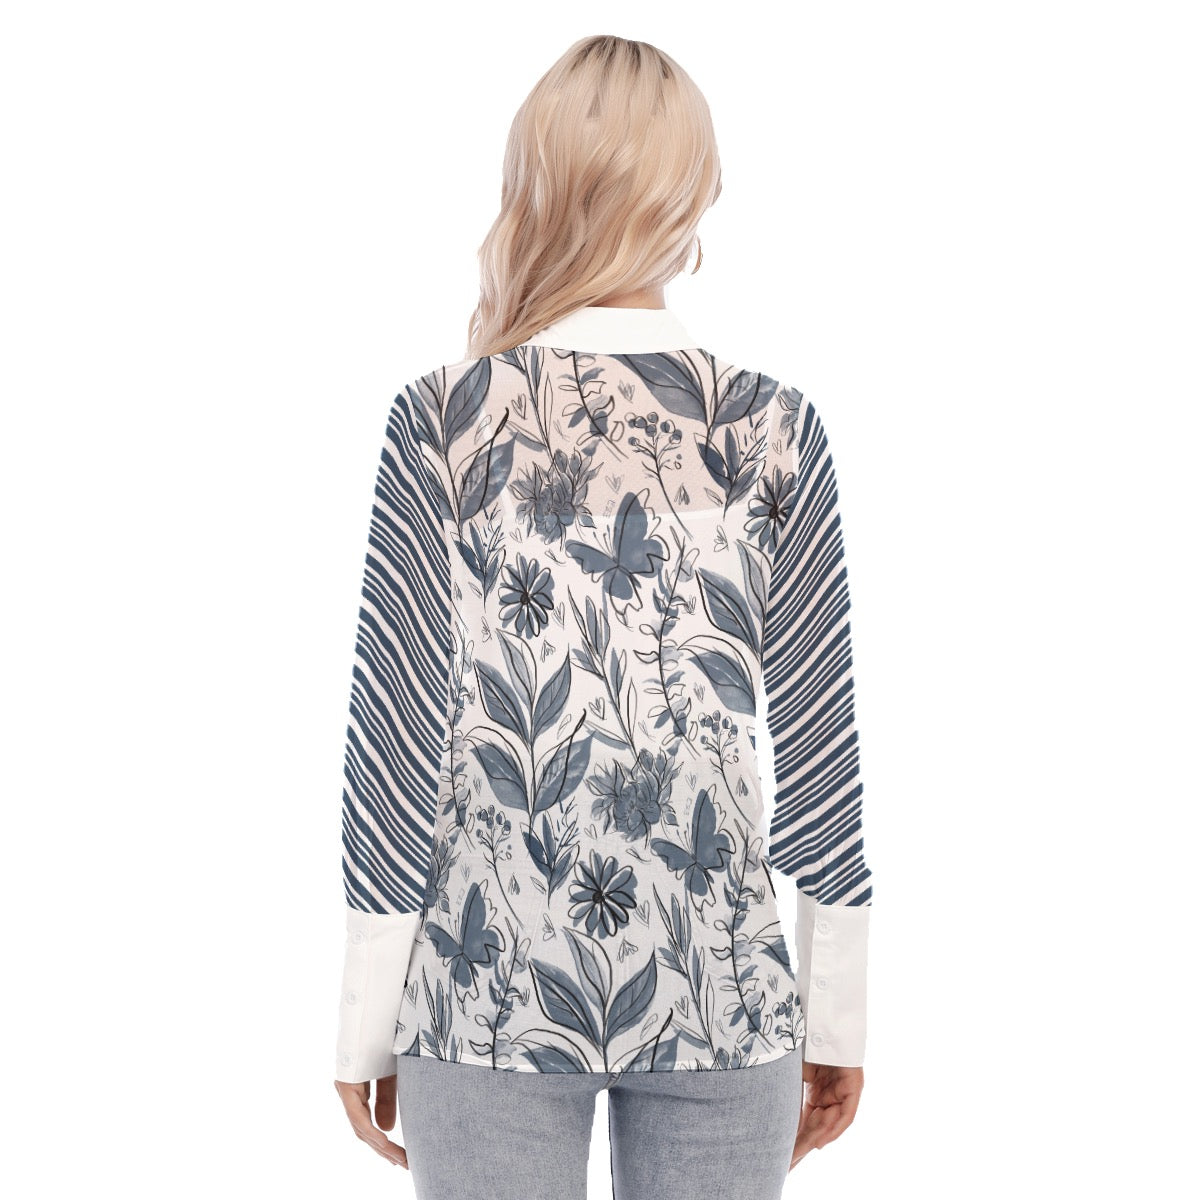 Watercolor blue and white Women's Mesh Blouse. Design hand-painted by the Designer Maria Alejandra E